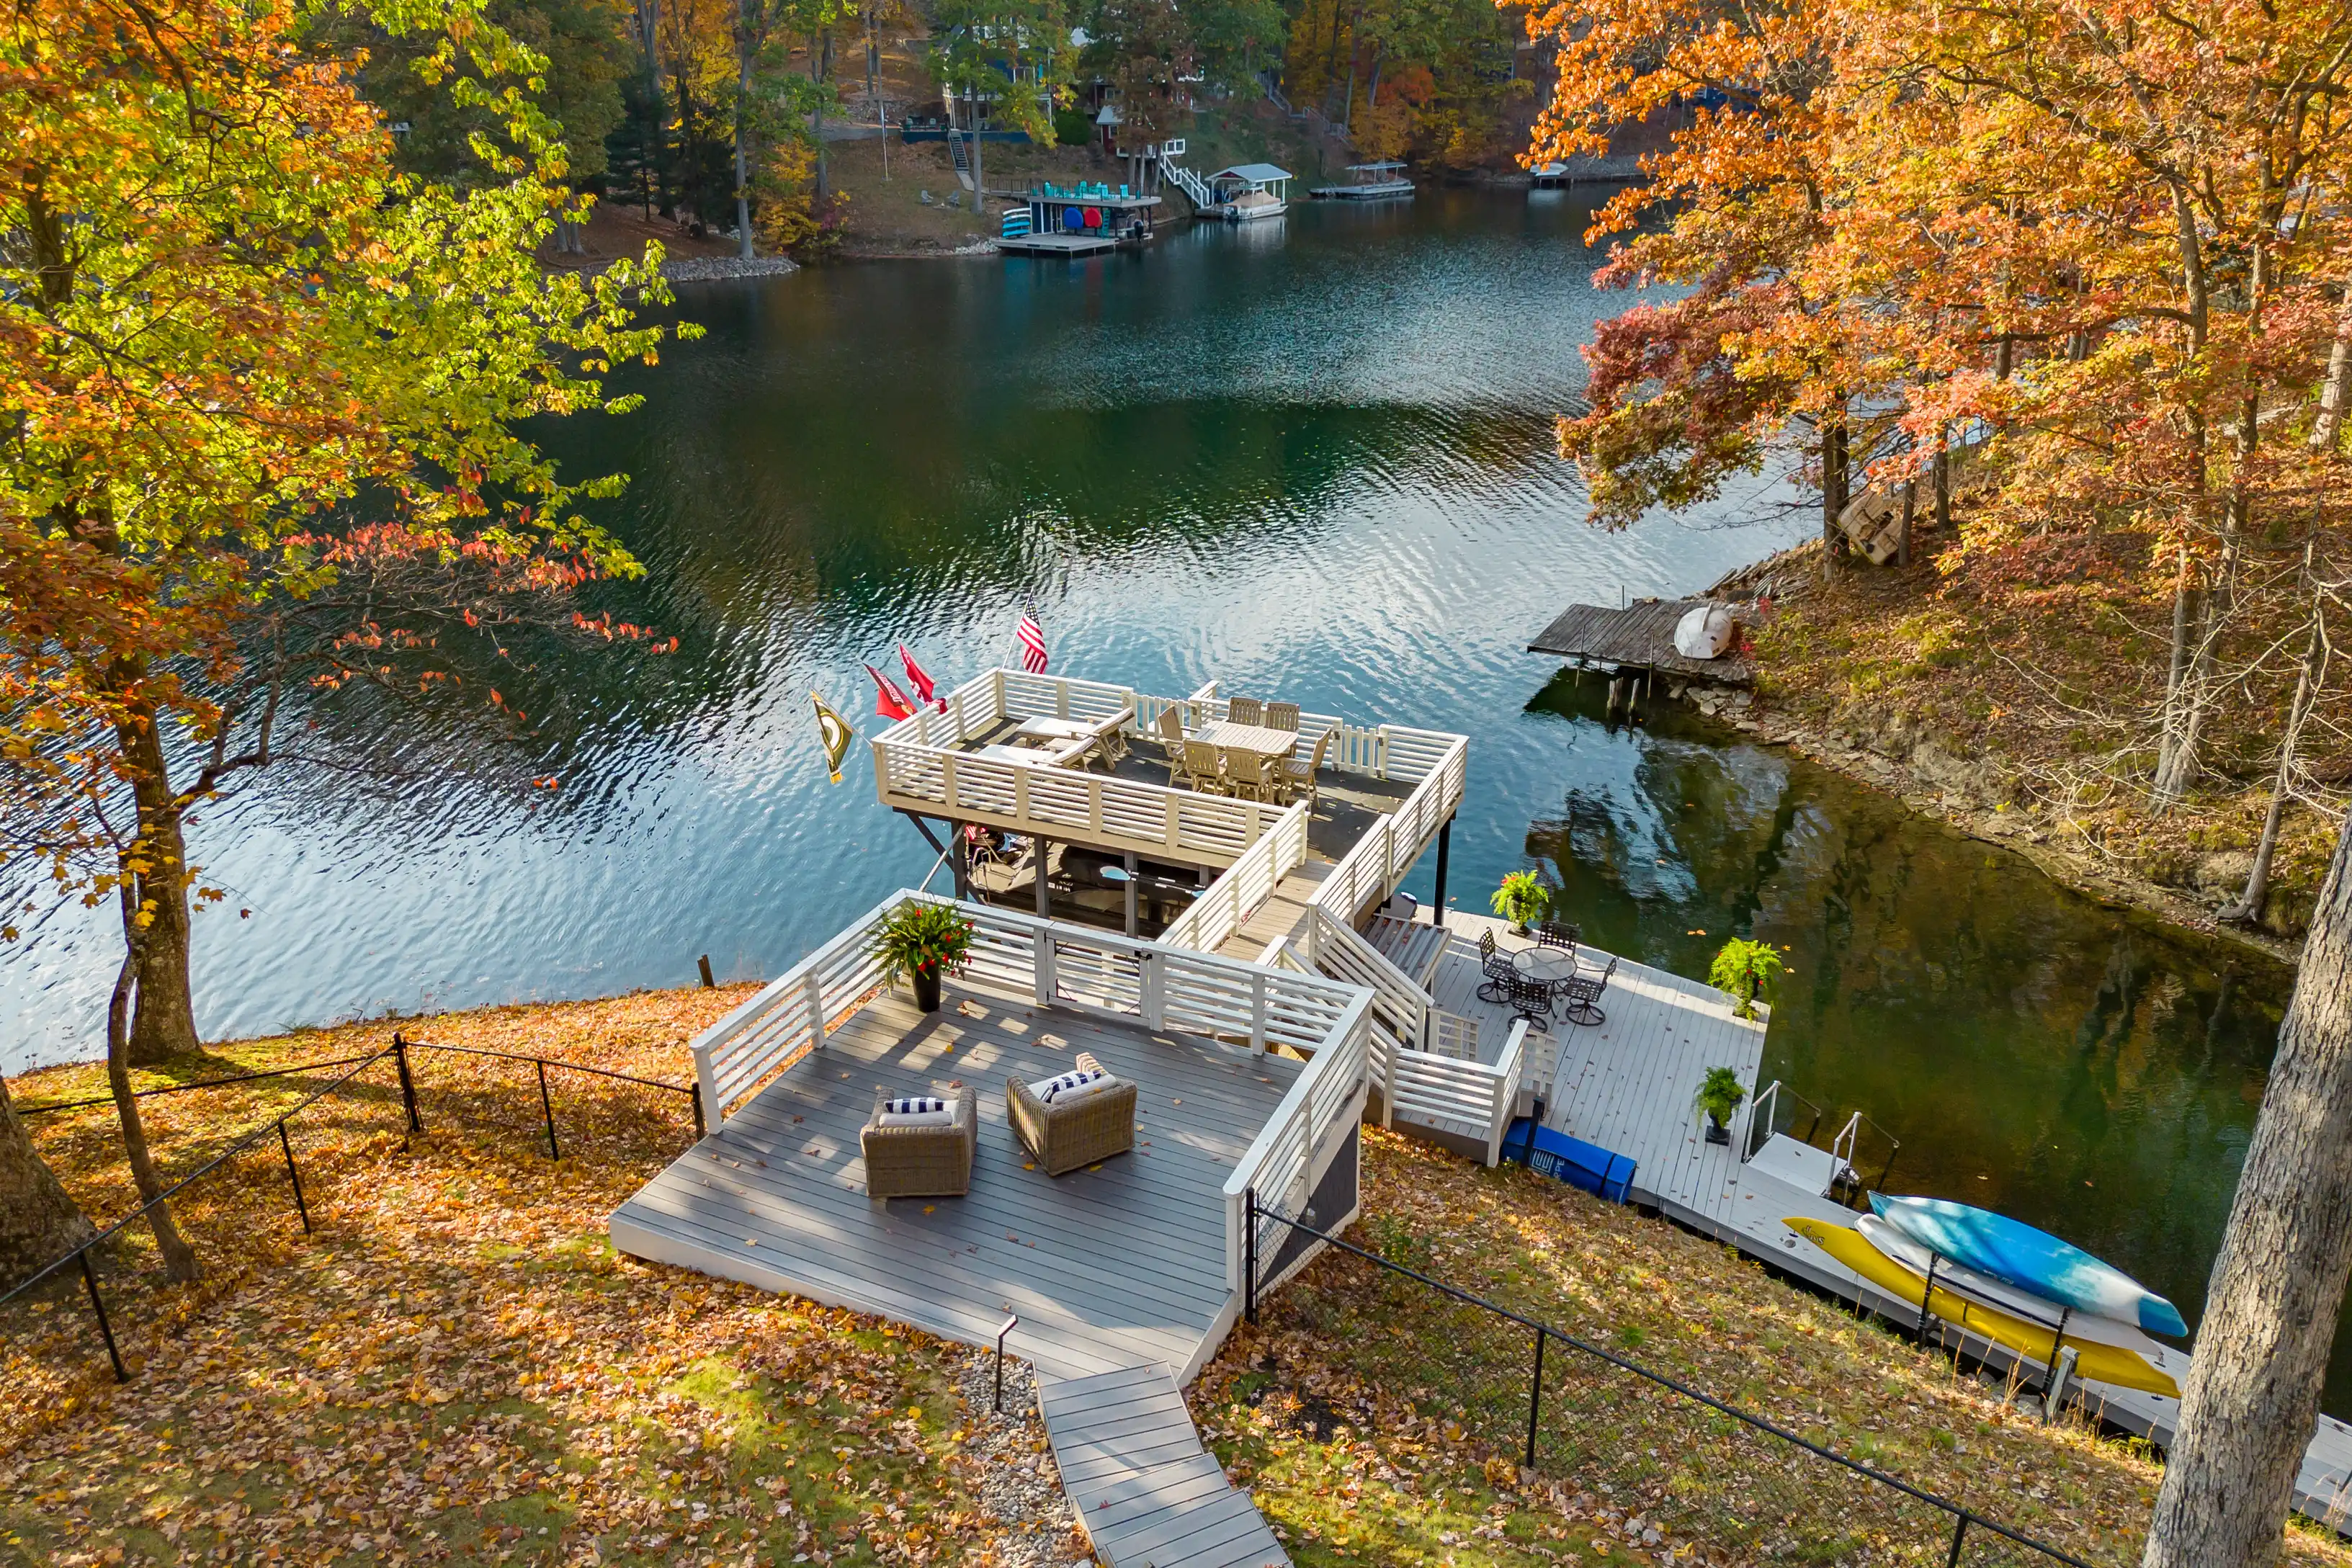 Aerial view of a lakeside wooden deck with outdoor furniture surrounded by trees with autumn foliage, a jet ski, and a boat docked nearby.